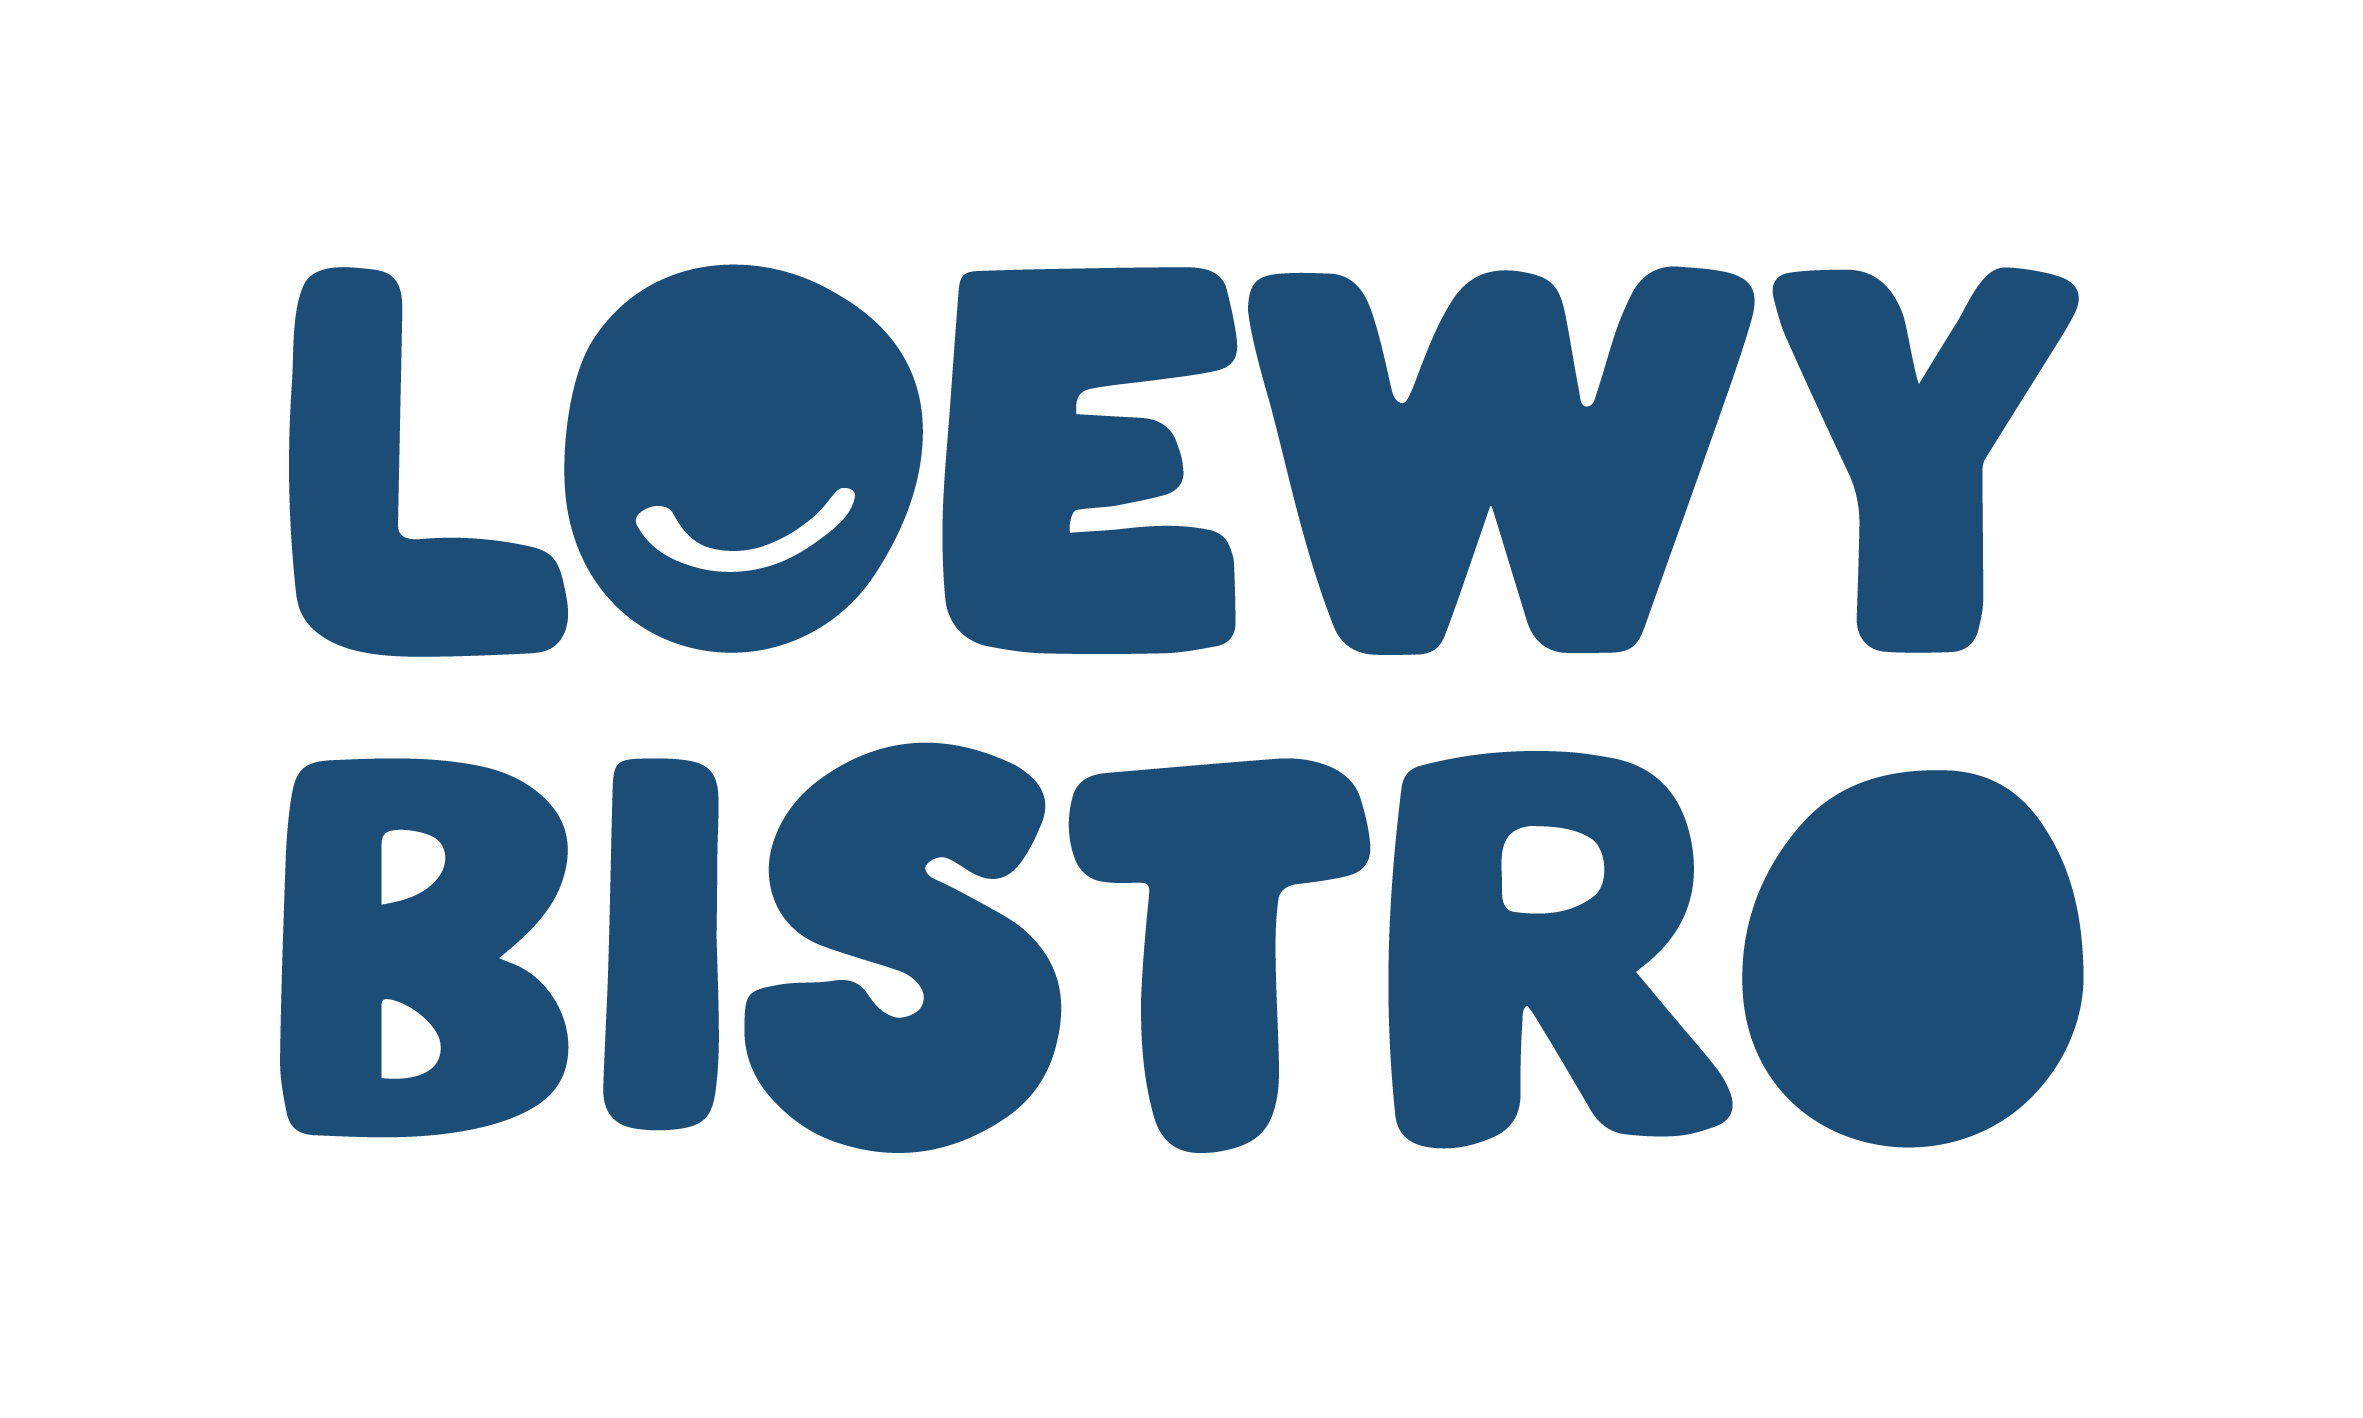 Loewy bistro